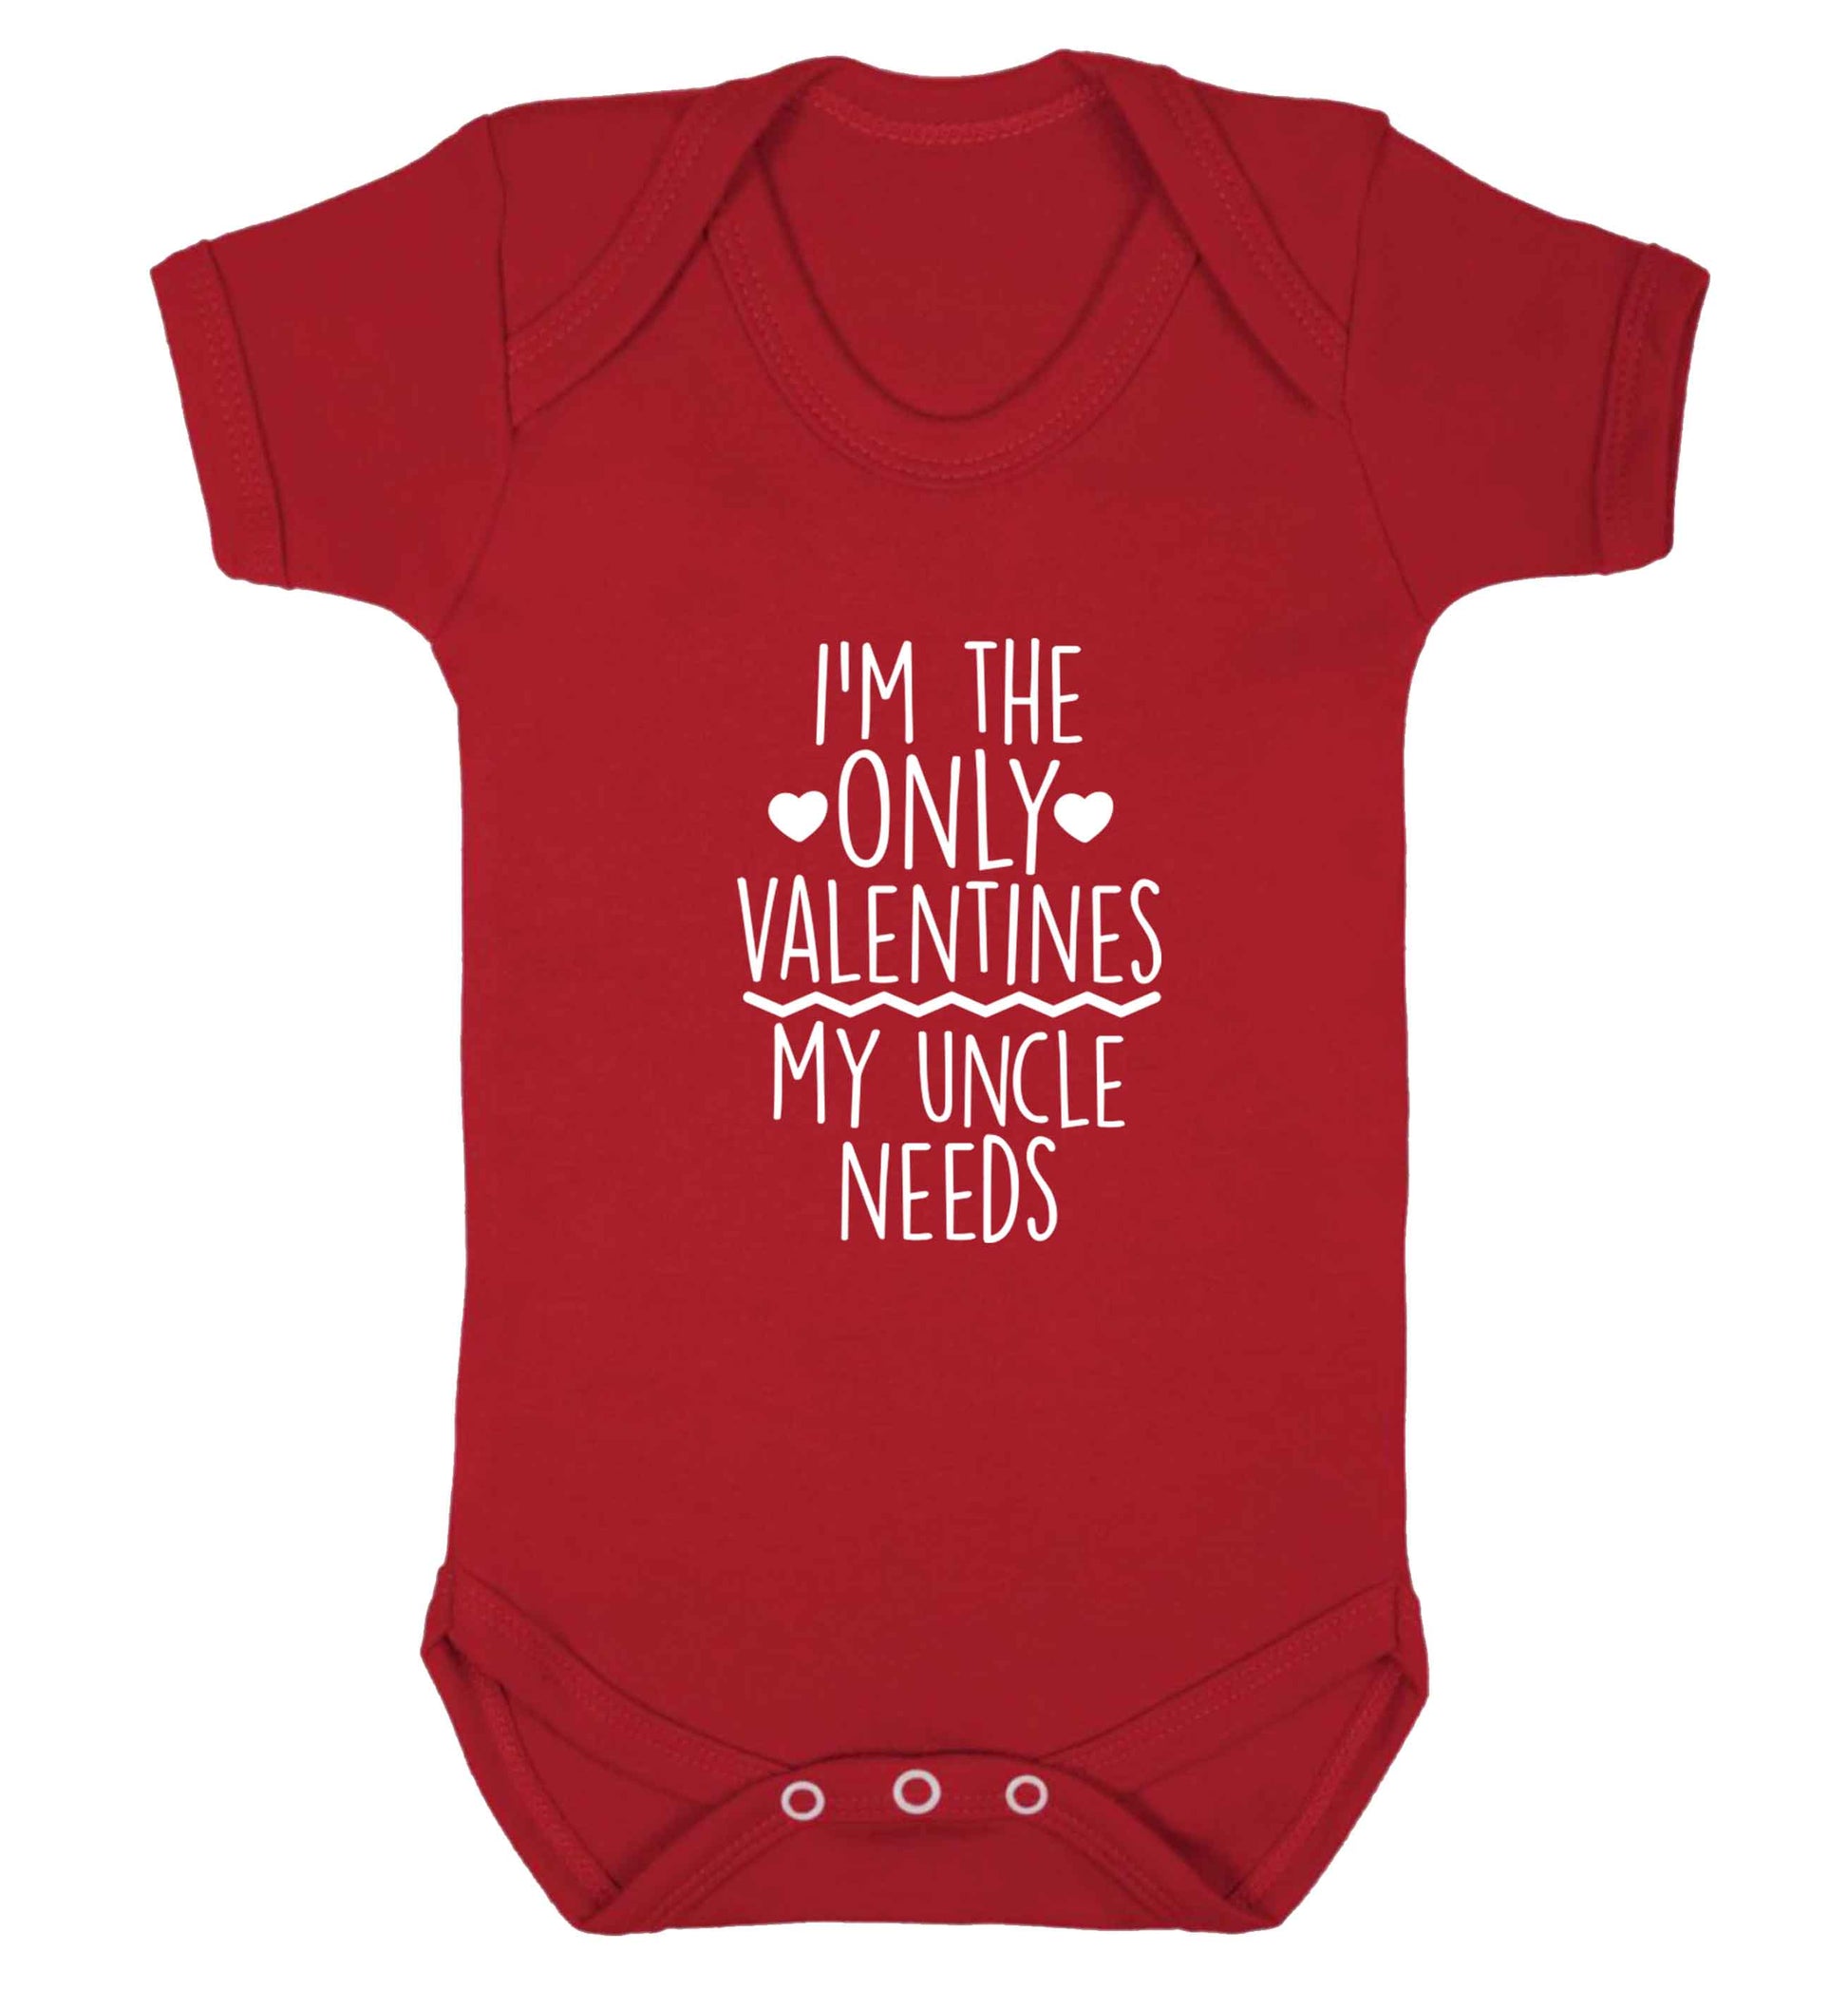 I'm the only valentines my uncle needs baby vest red 18-24 months